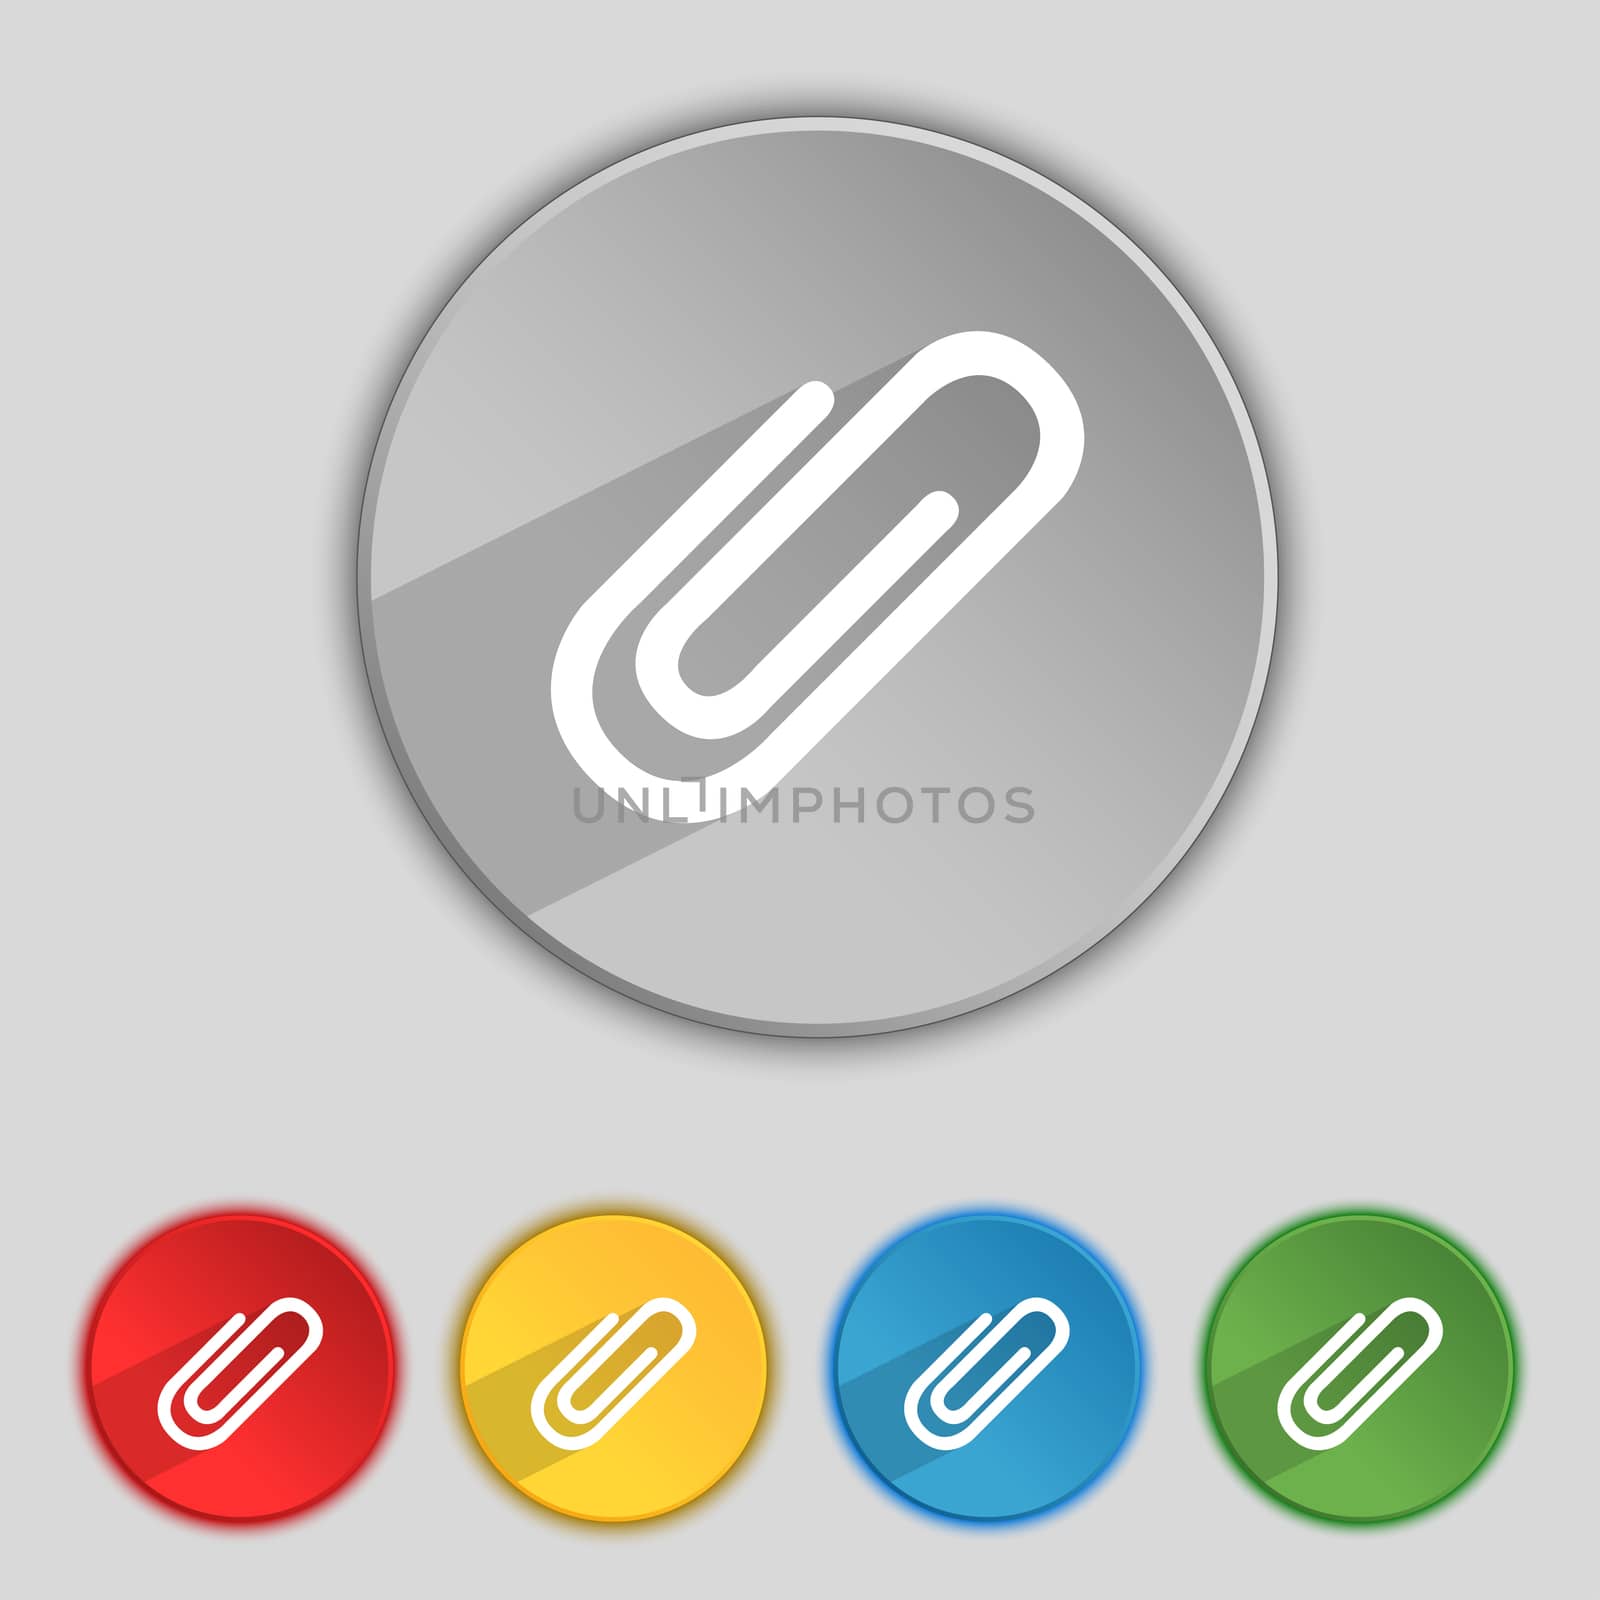 Paper clip sign icon. Clip symbol. Set of colored buttons. illustration